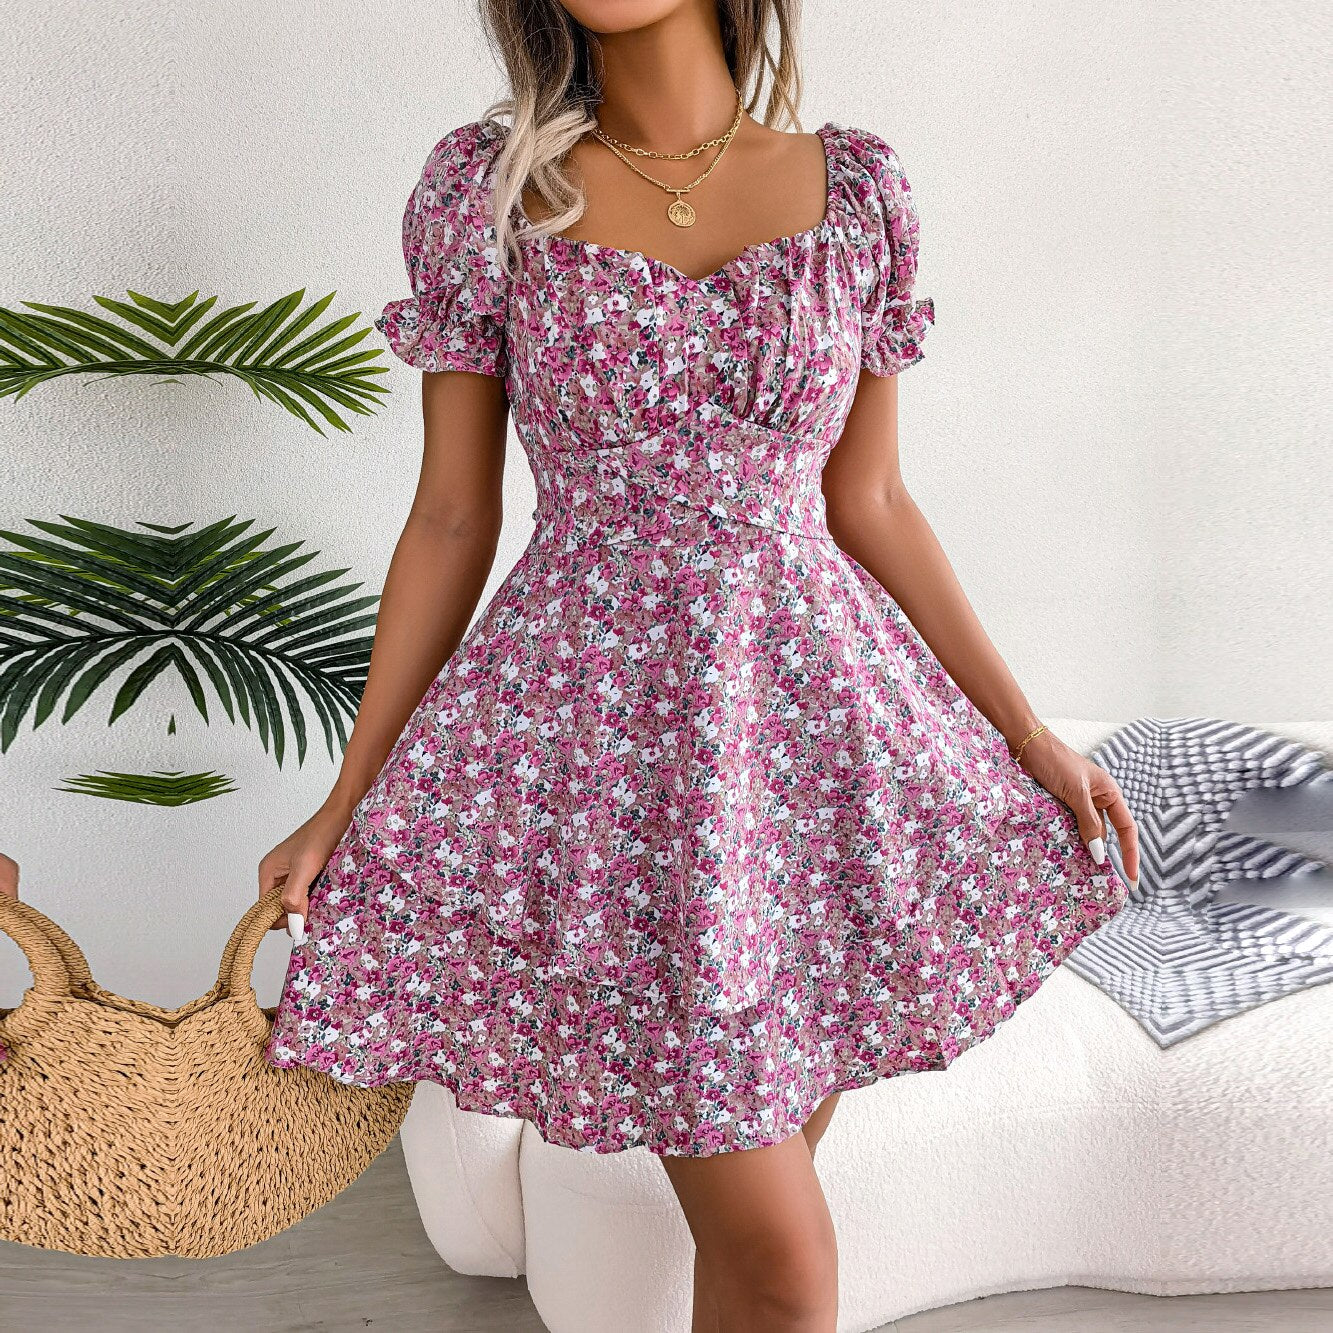 Floral Dress For Fashion